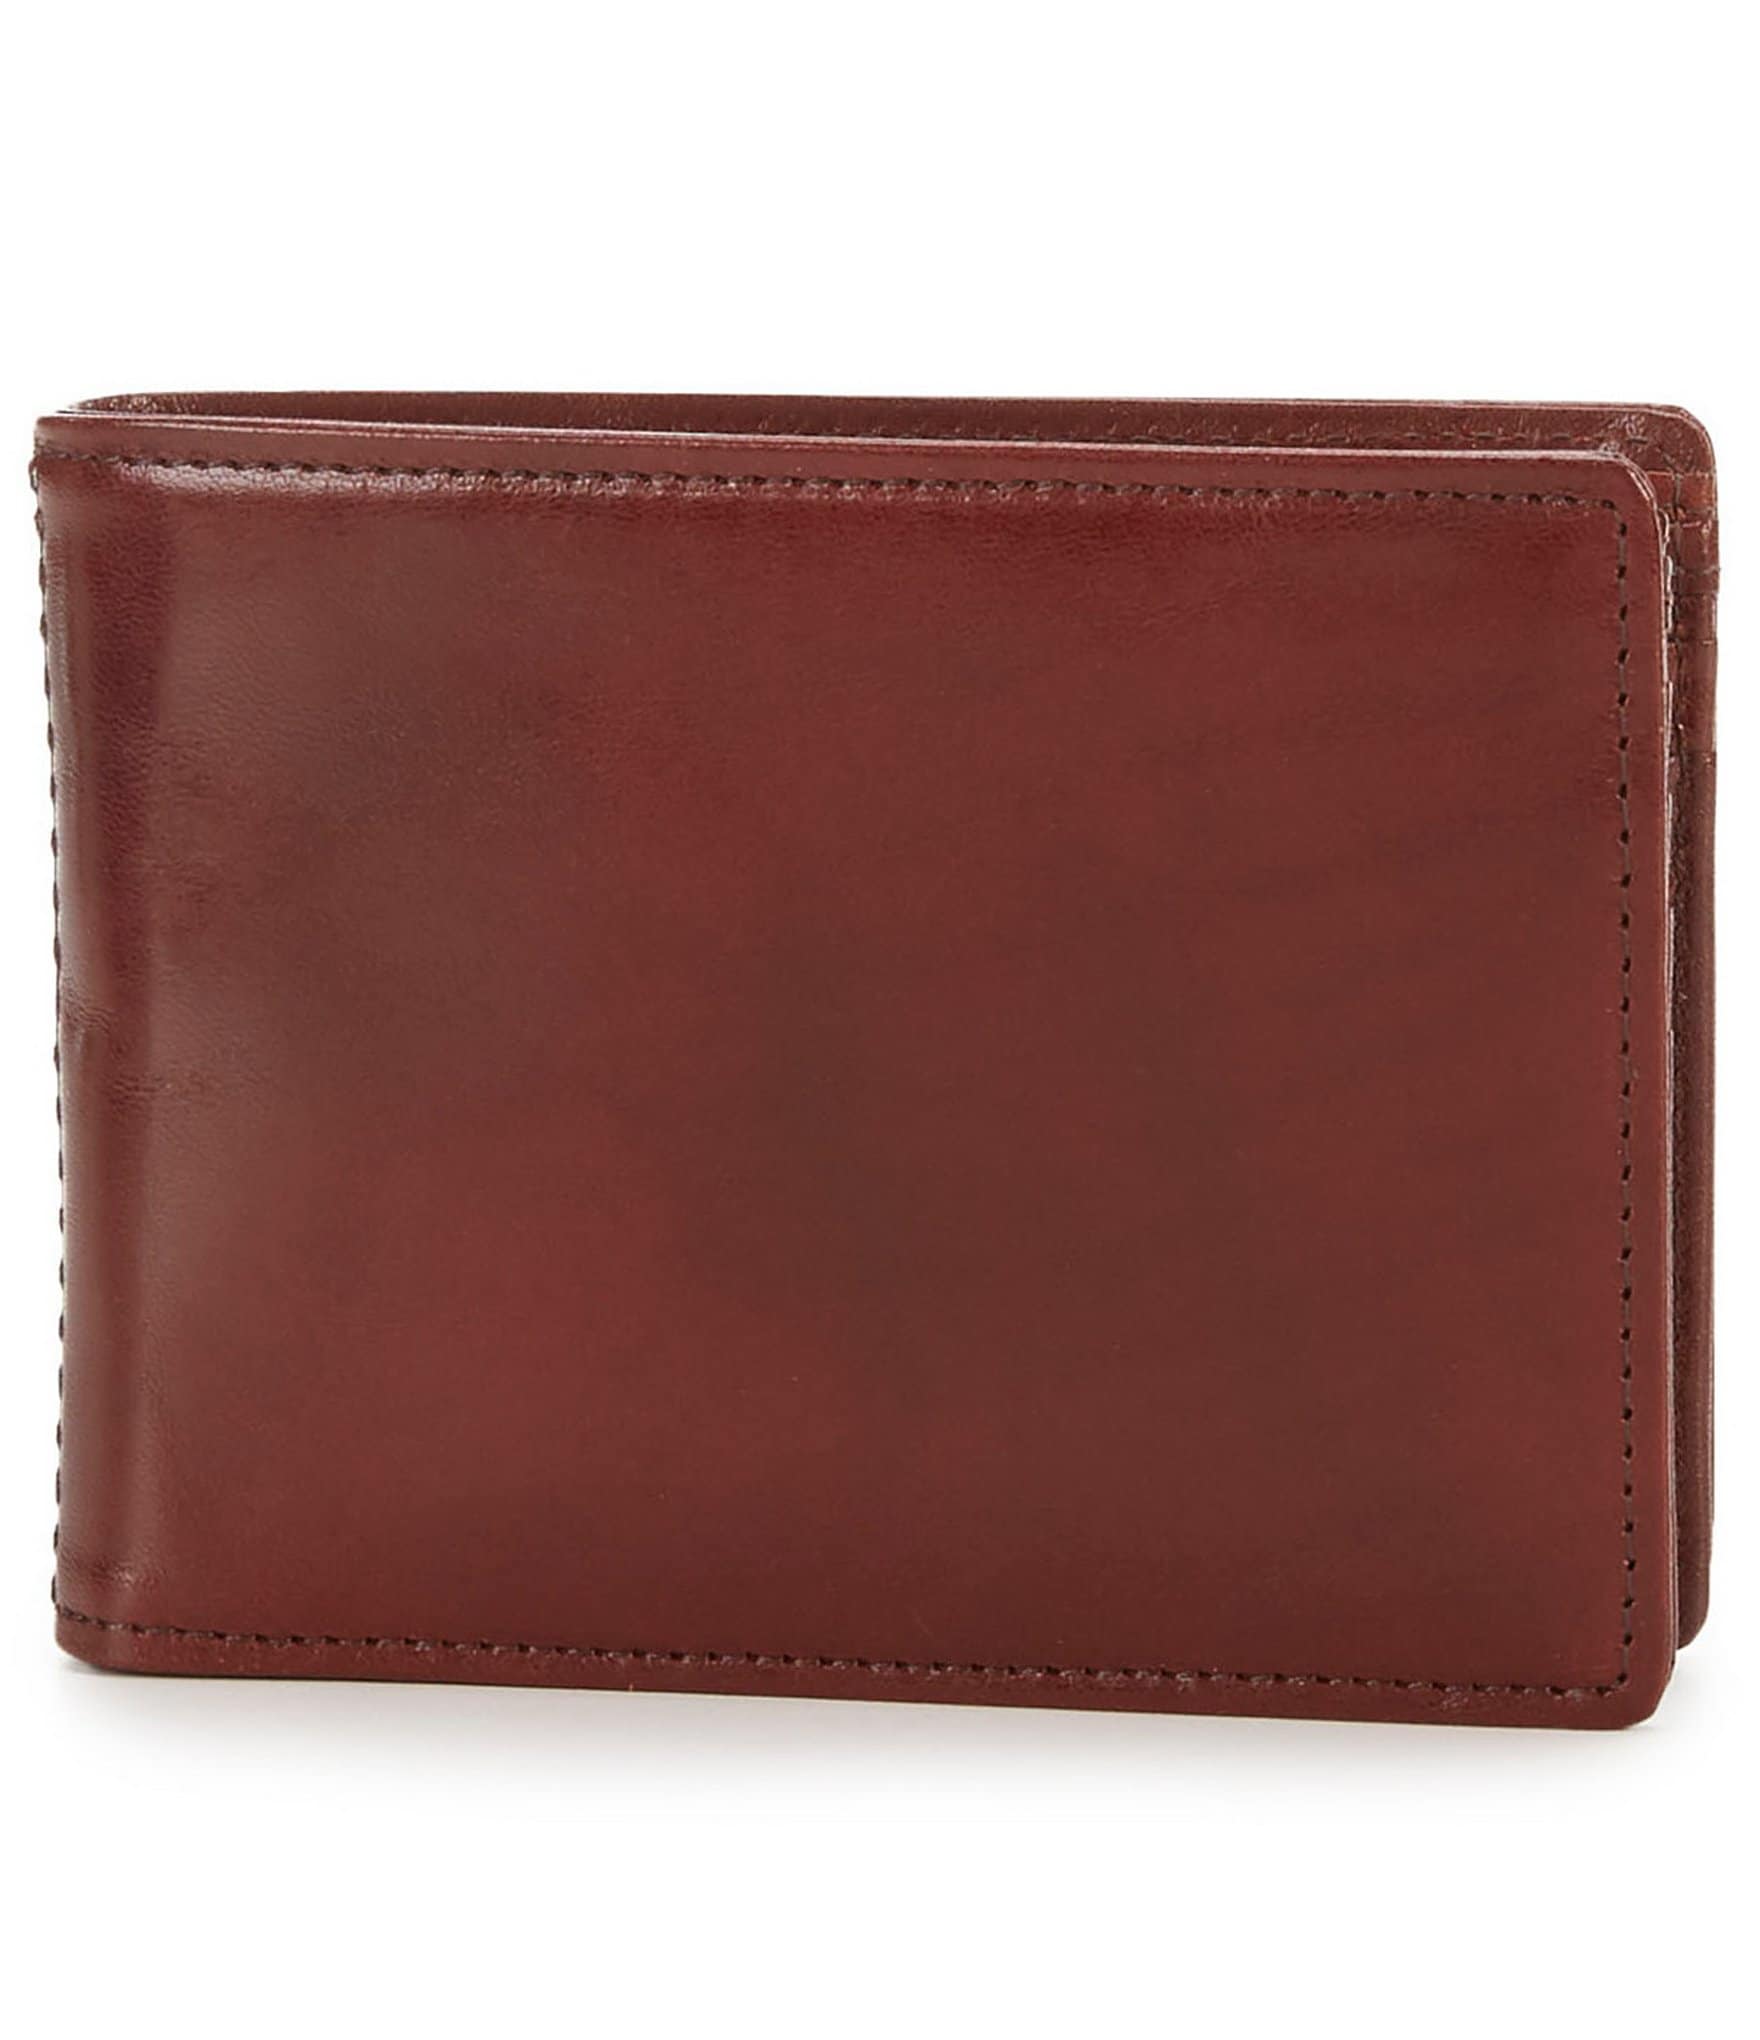 Ole Miss Genuine Leather Fossil Wallet. : r/wallets